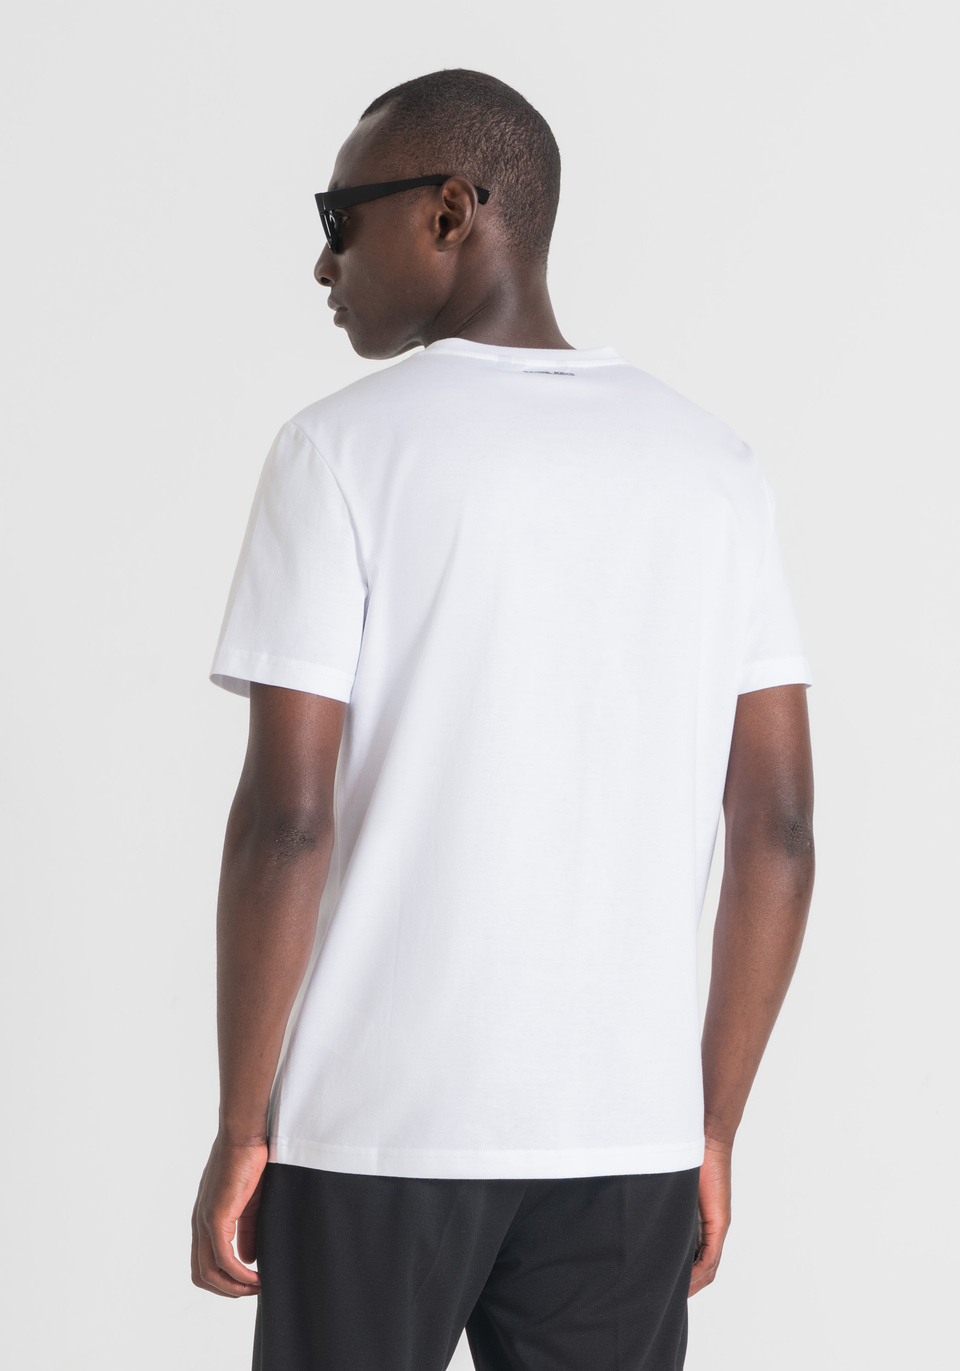 SLIM-FIT T-SHIRT IN PURE COTTON WITH TIGER PRINT - Antony Morato Online Shop